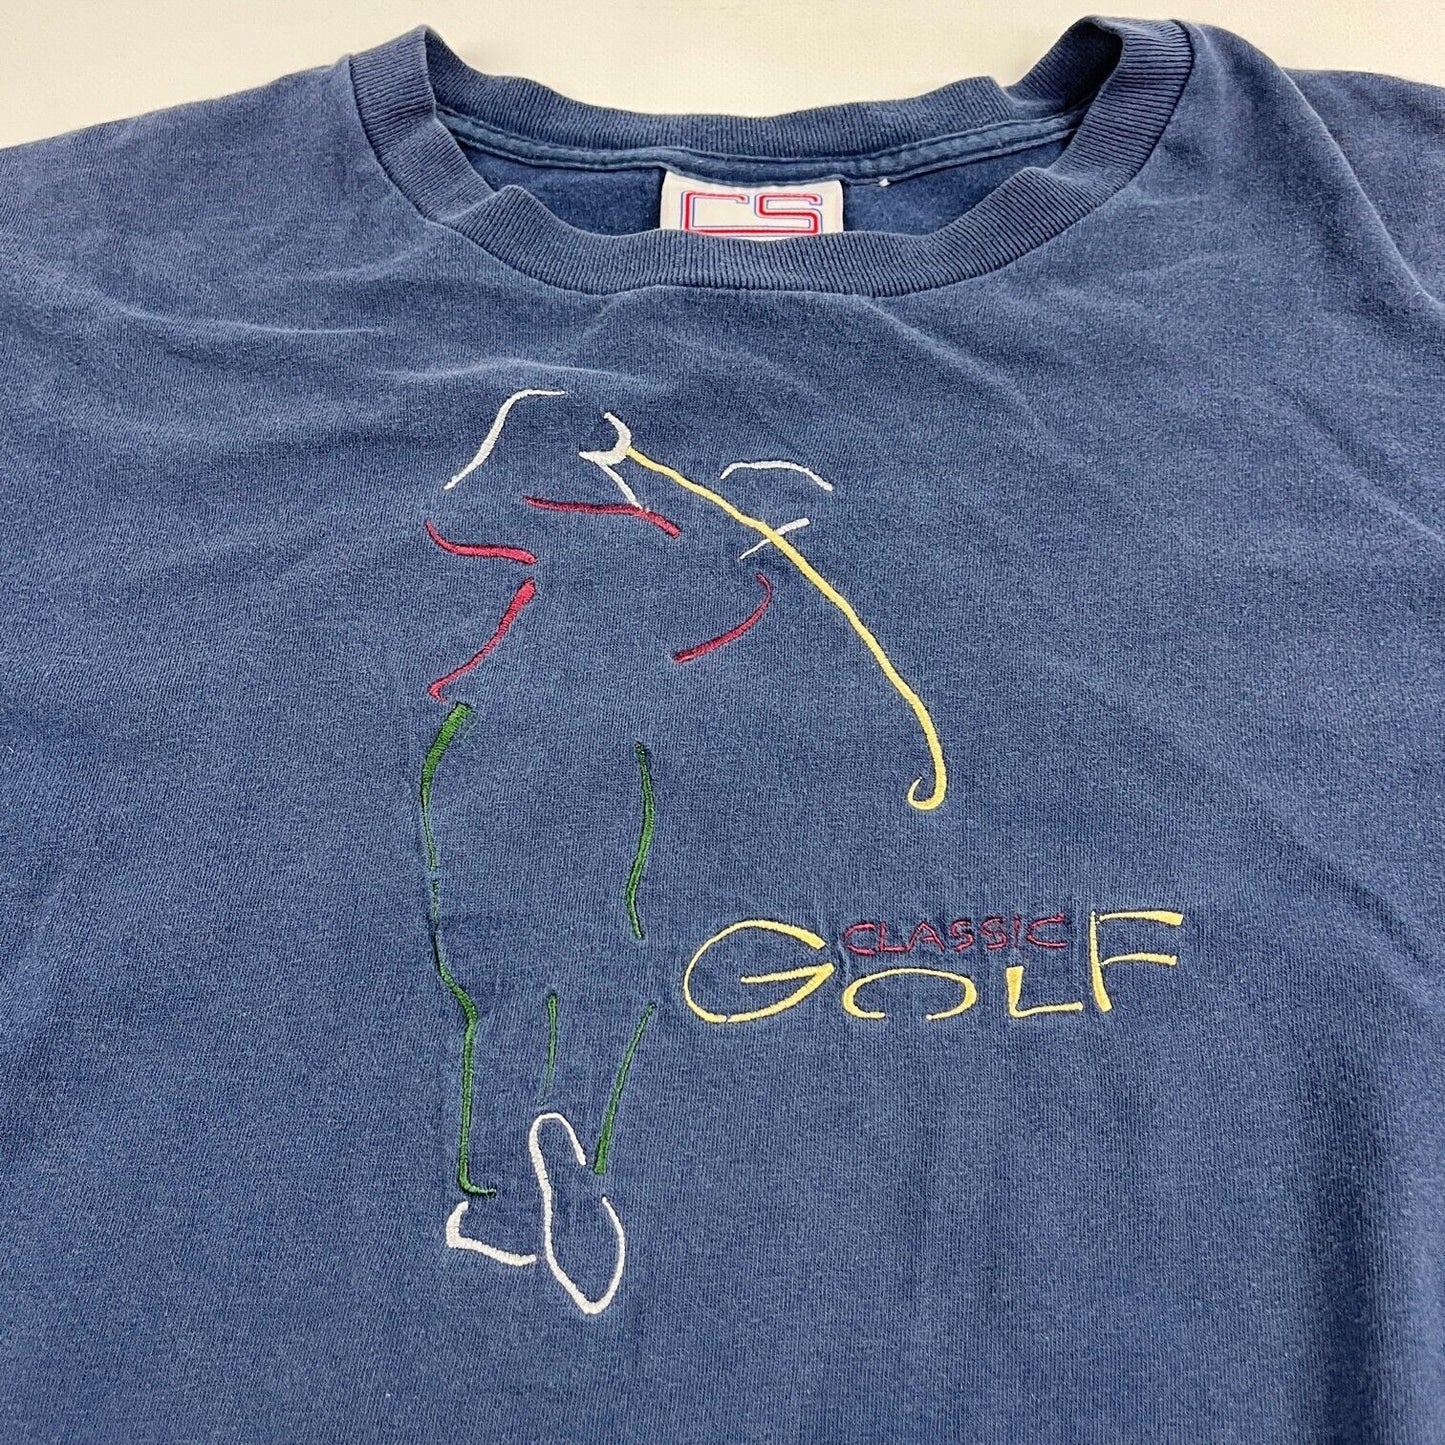 VINTAGE Golf Graphic Embroidered Shirt Adult Extra Large Navy Blue Men 90s